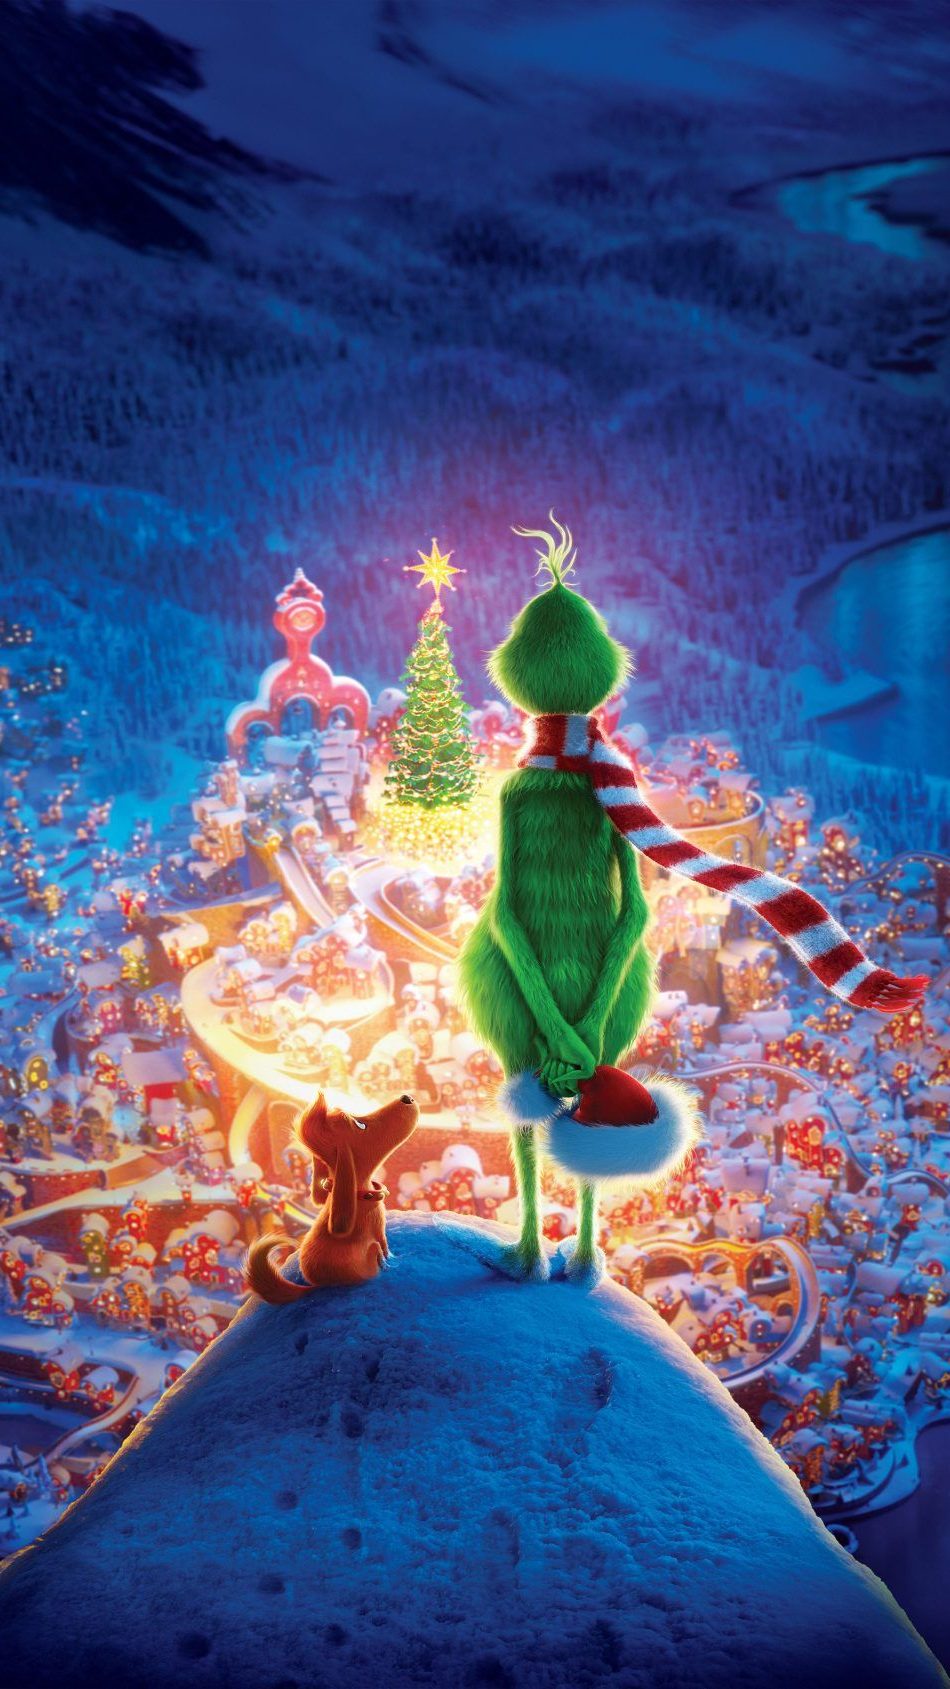 The Grinch Wallpaper - NawPic